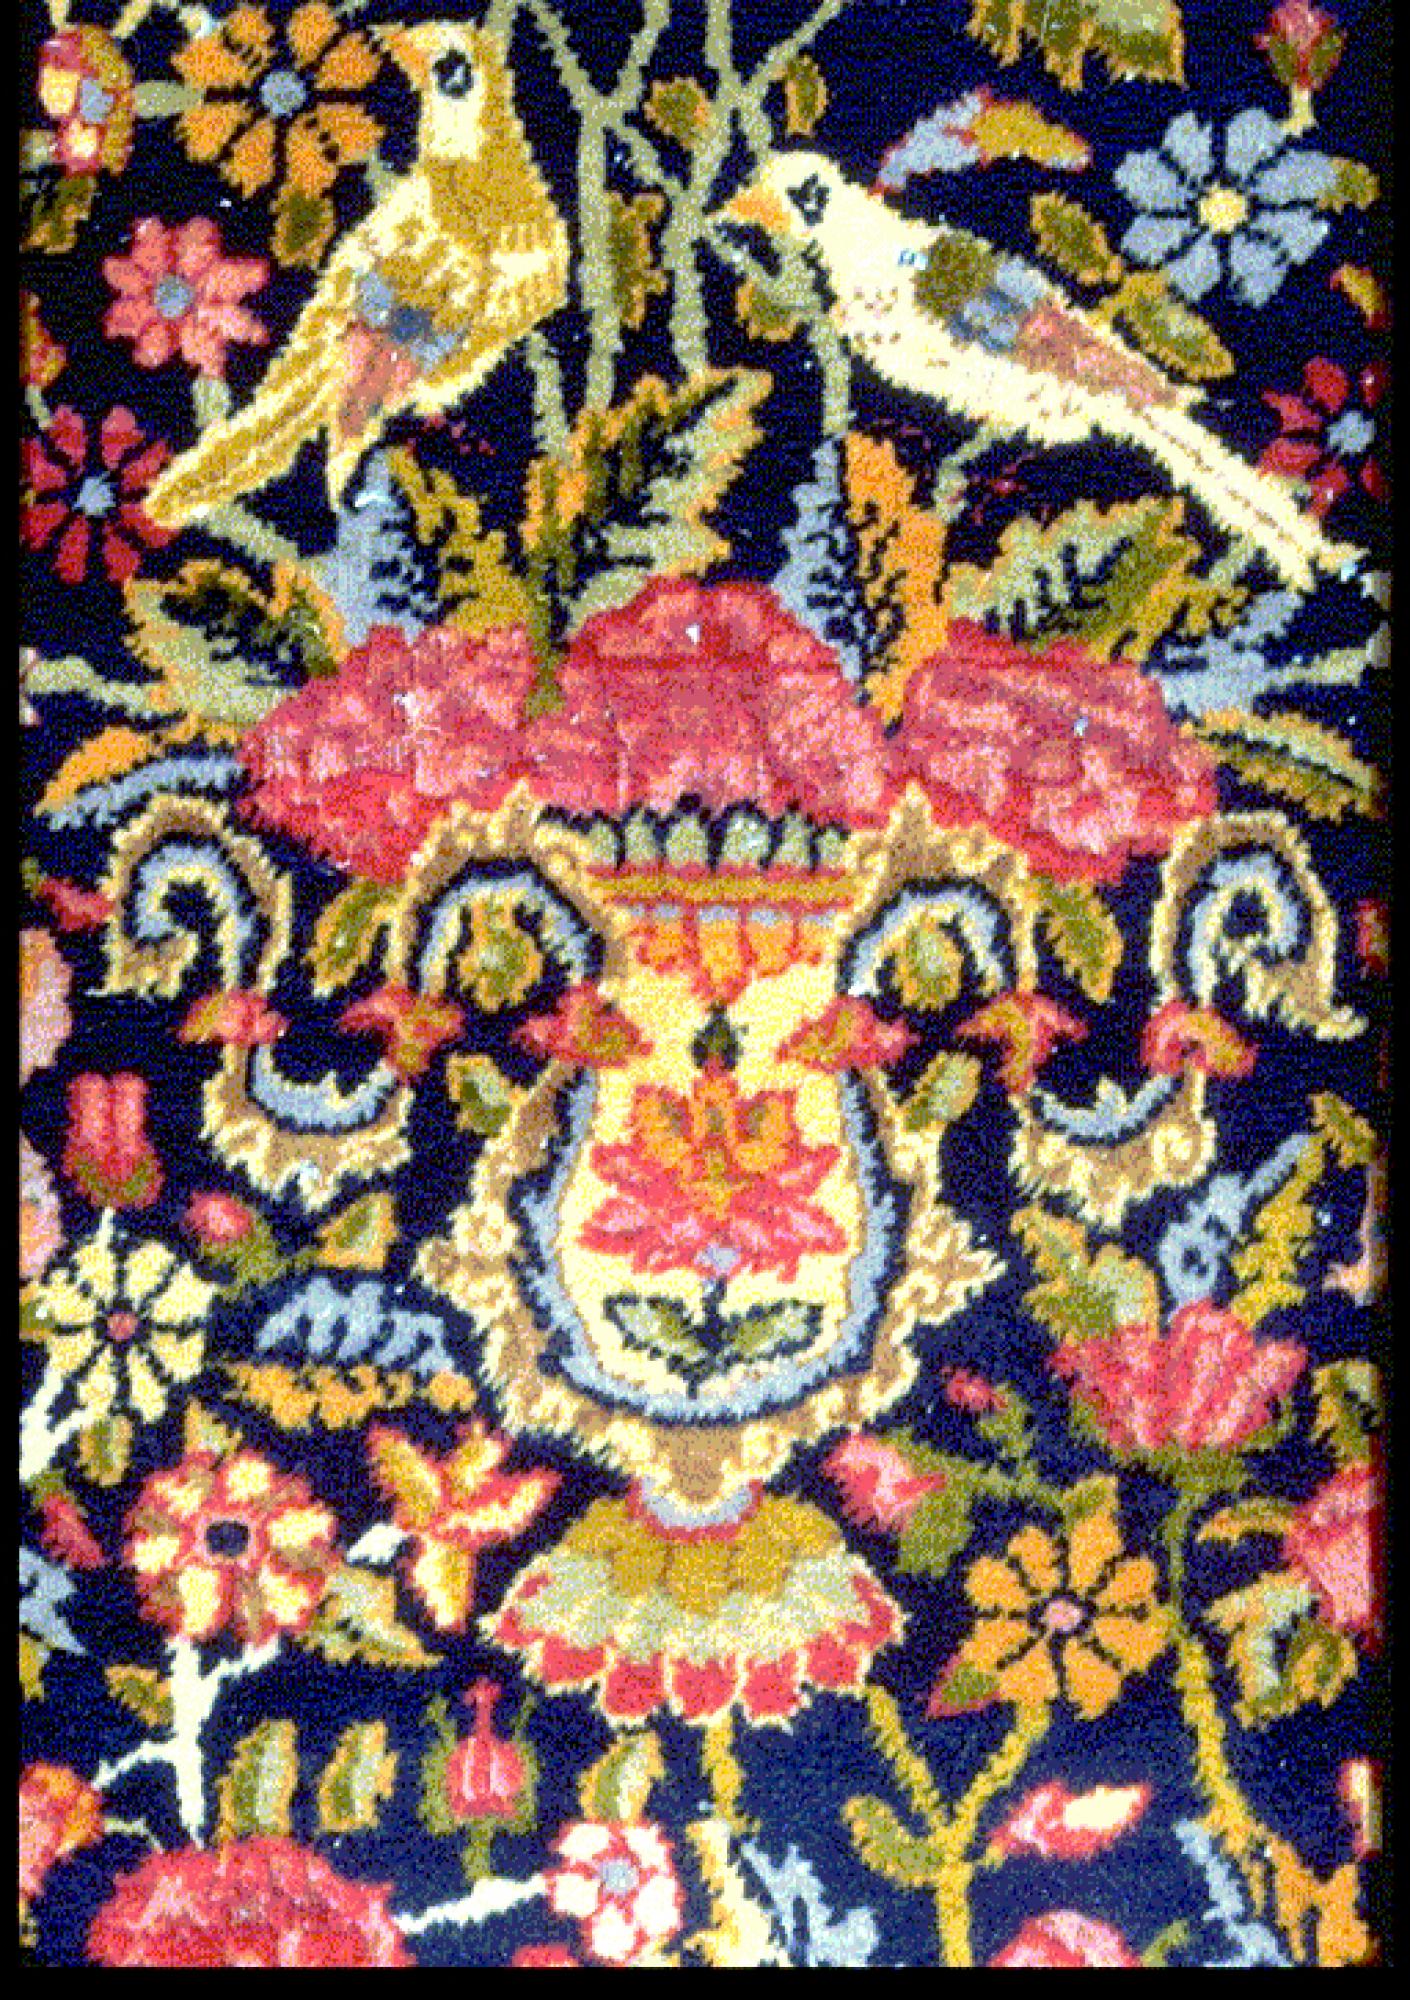 History of the rugs - Parisian gallery specializing in the sale of antique Oriental and rare rugs